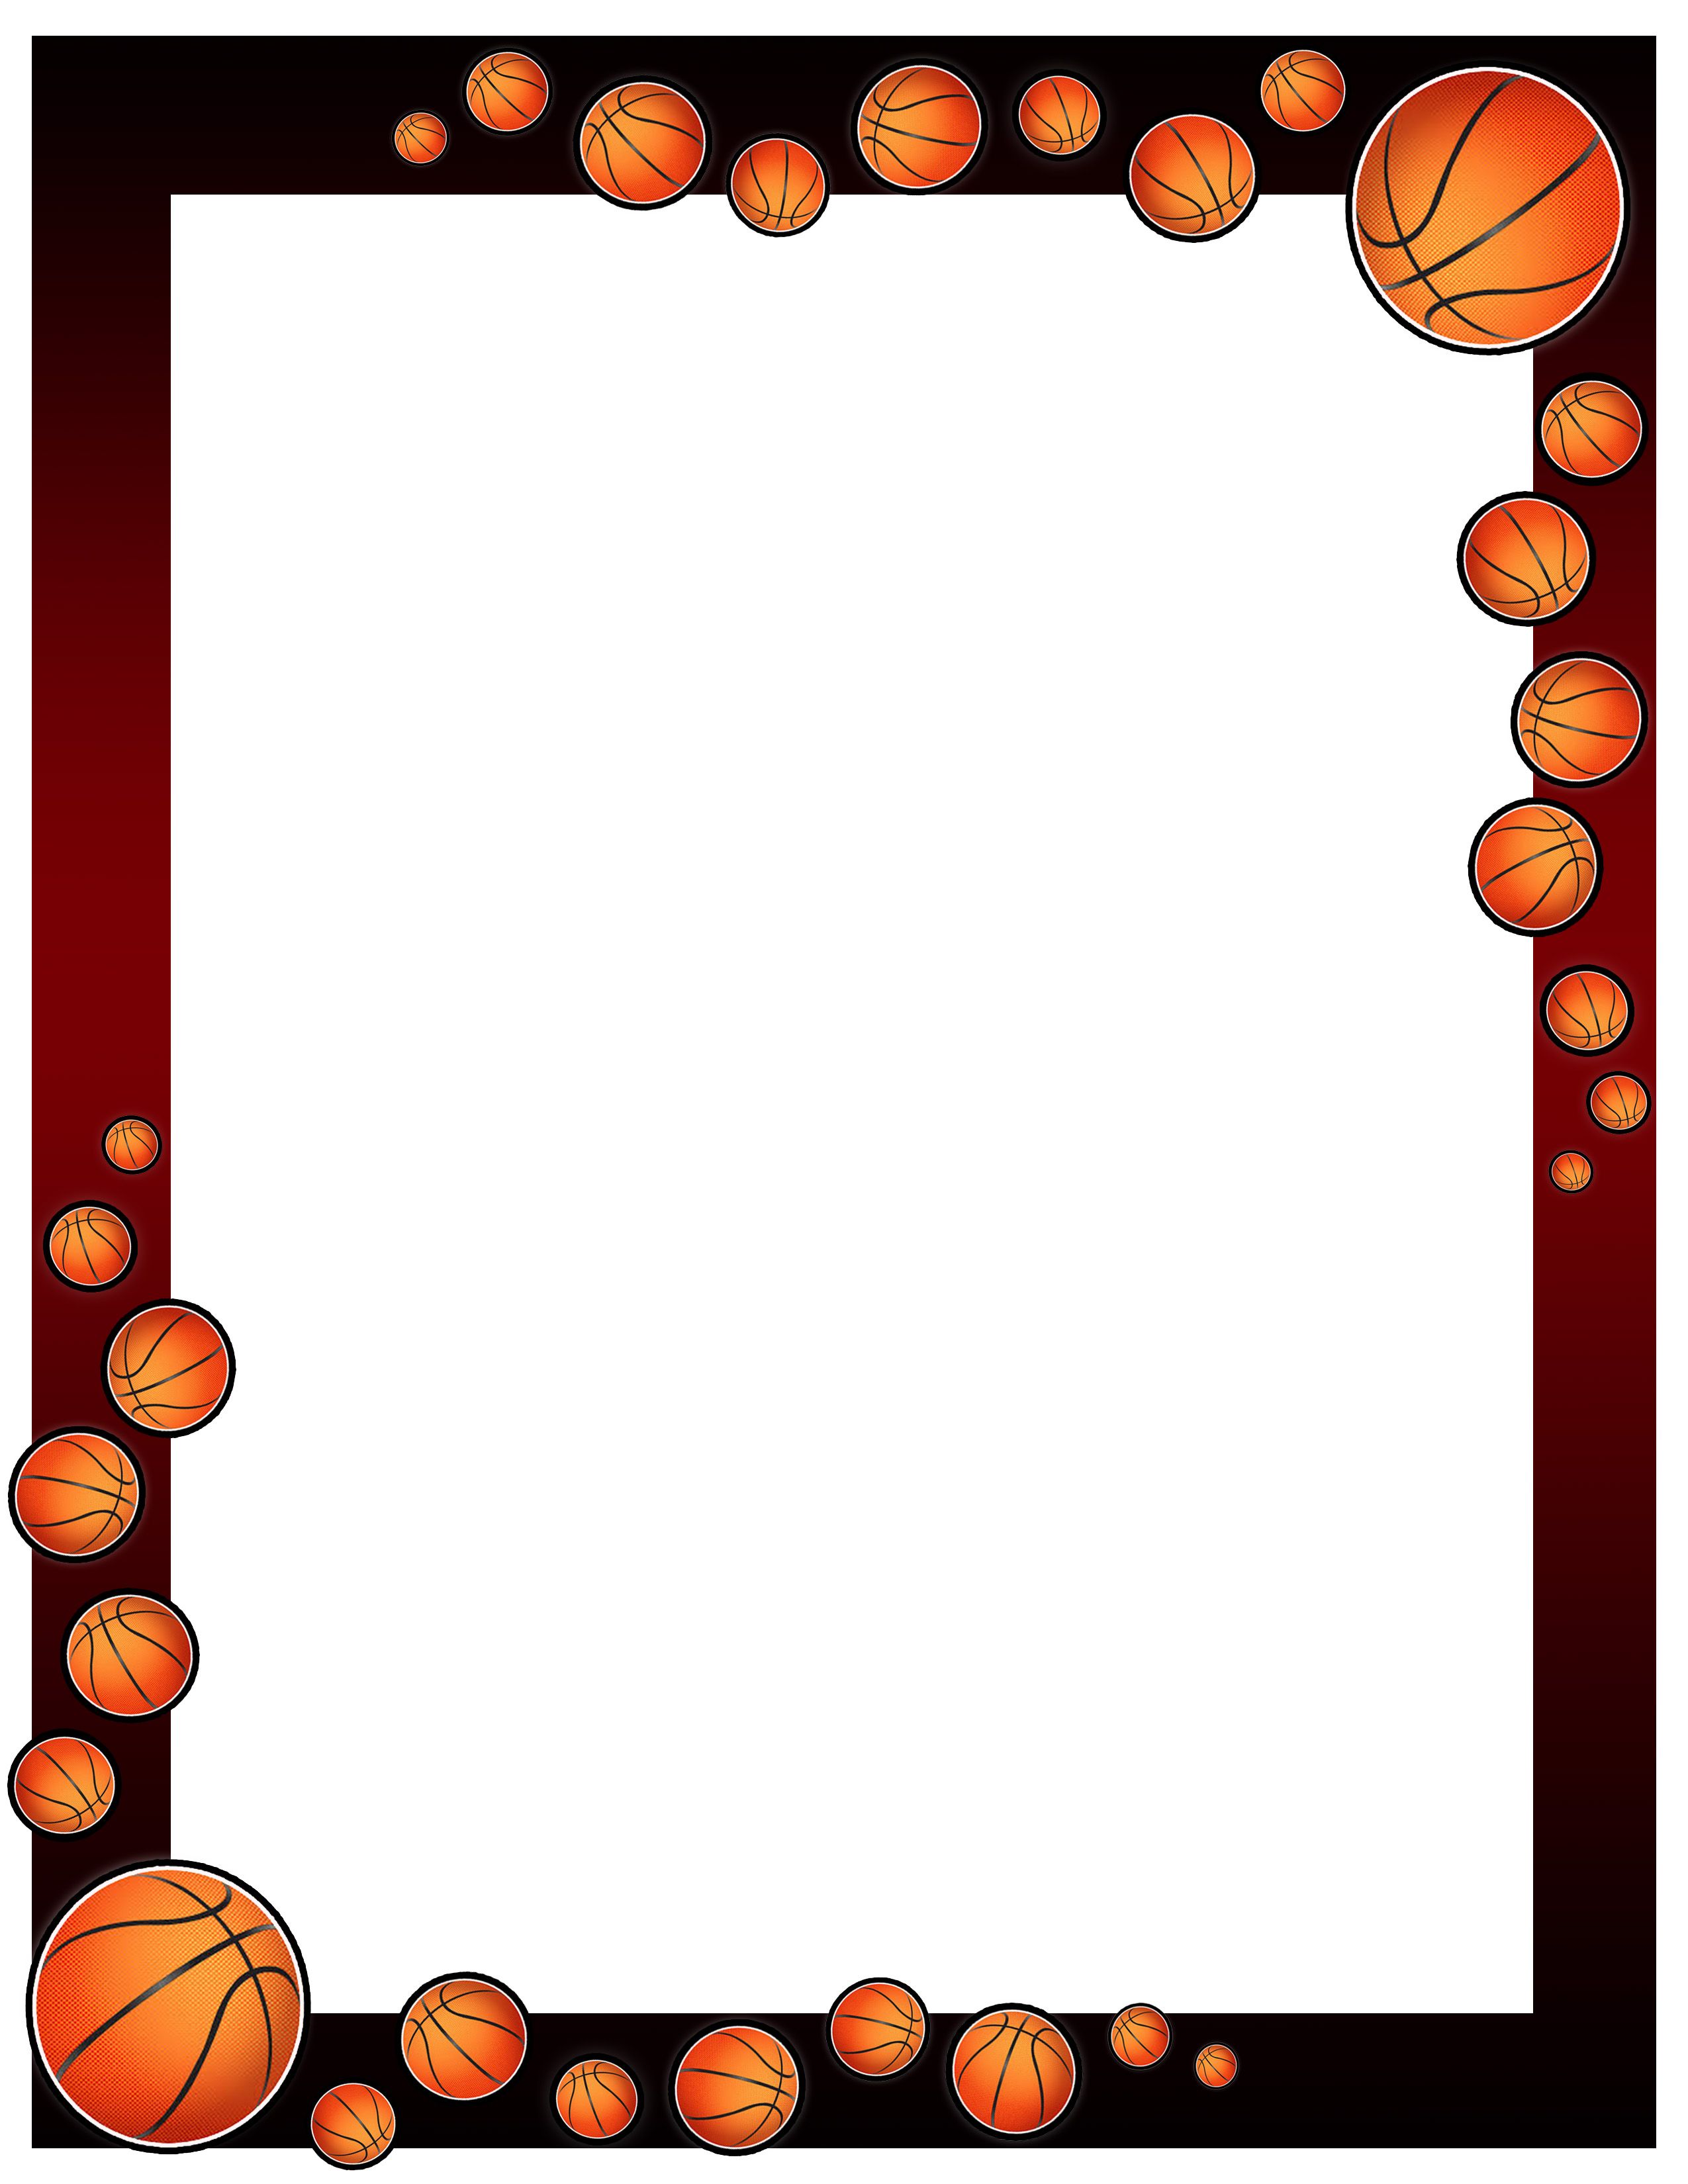 Basketball clipart boarder, Basketball boarder Transparent FREE for